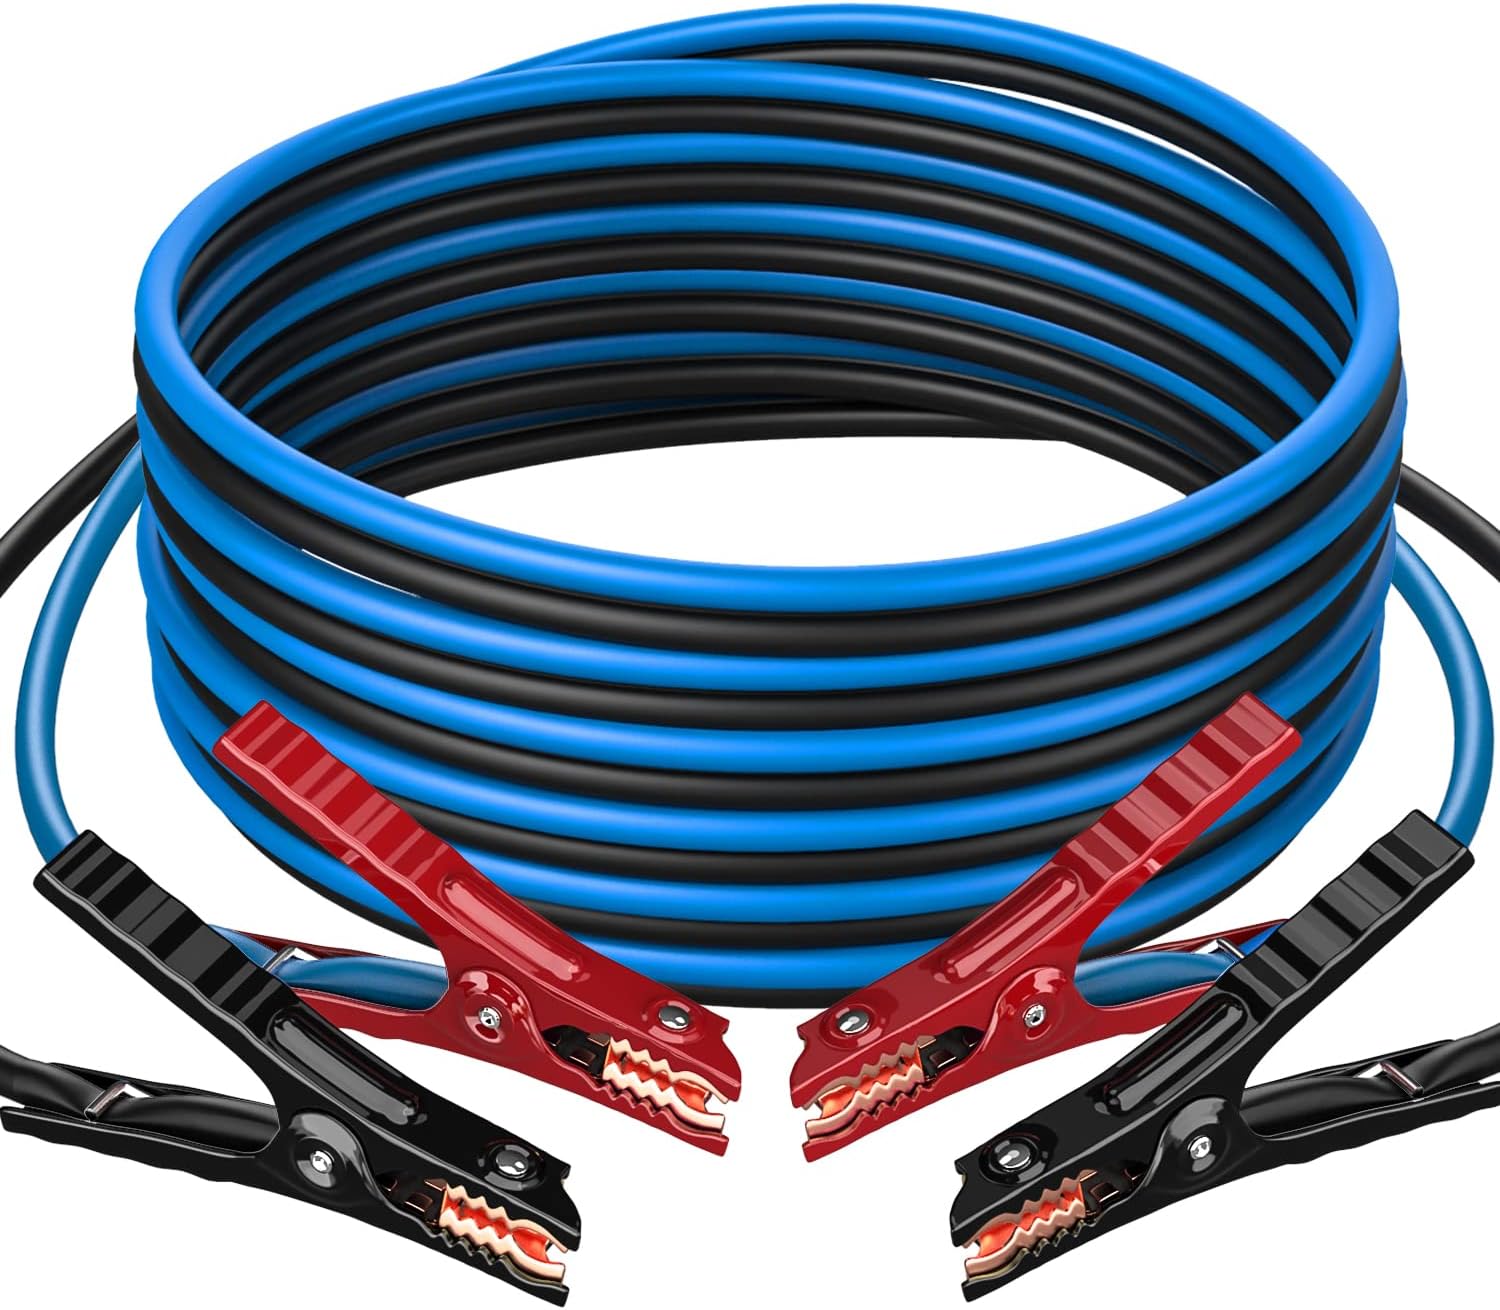 Powrun P220 Jumper Cables for Car Battery, 800A Heavy [...]